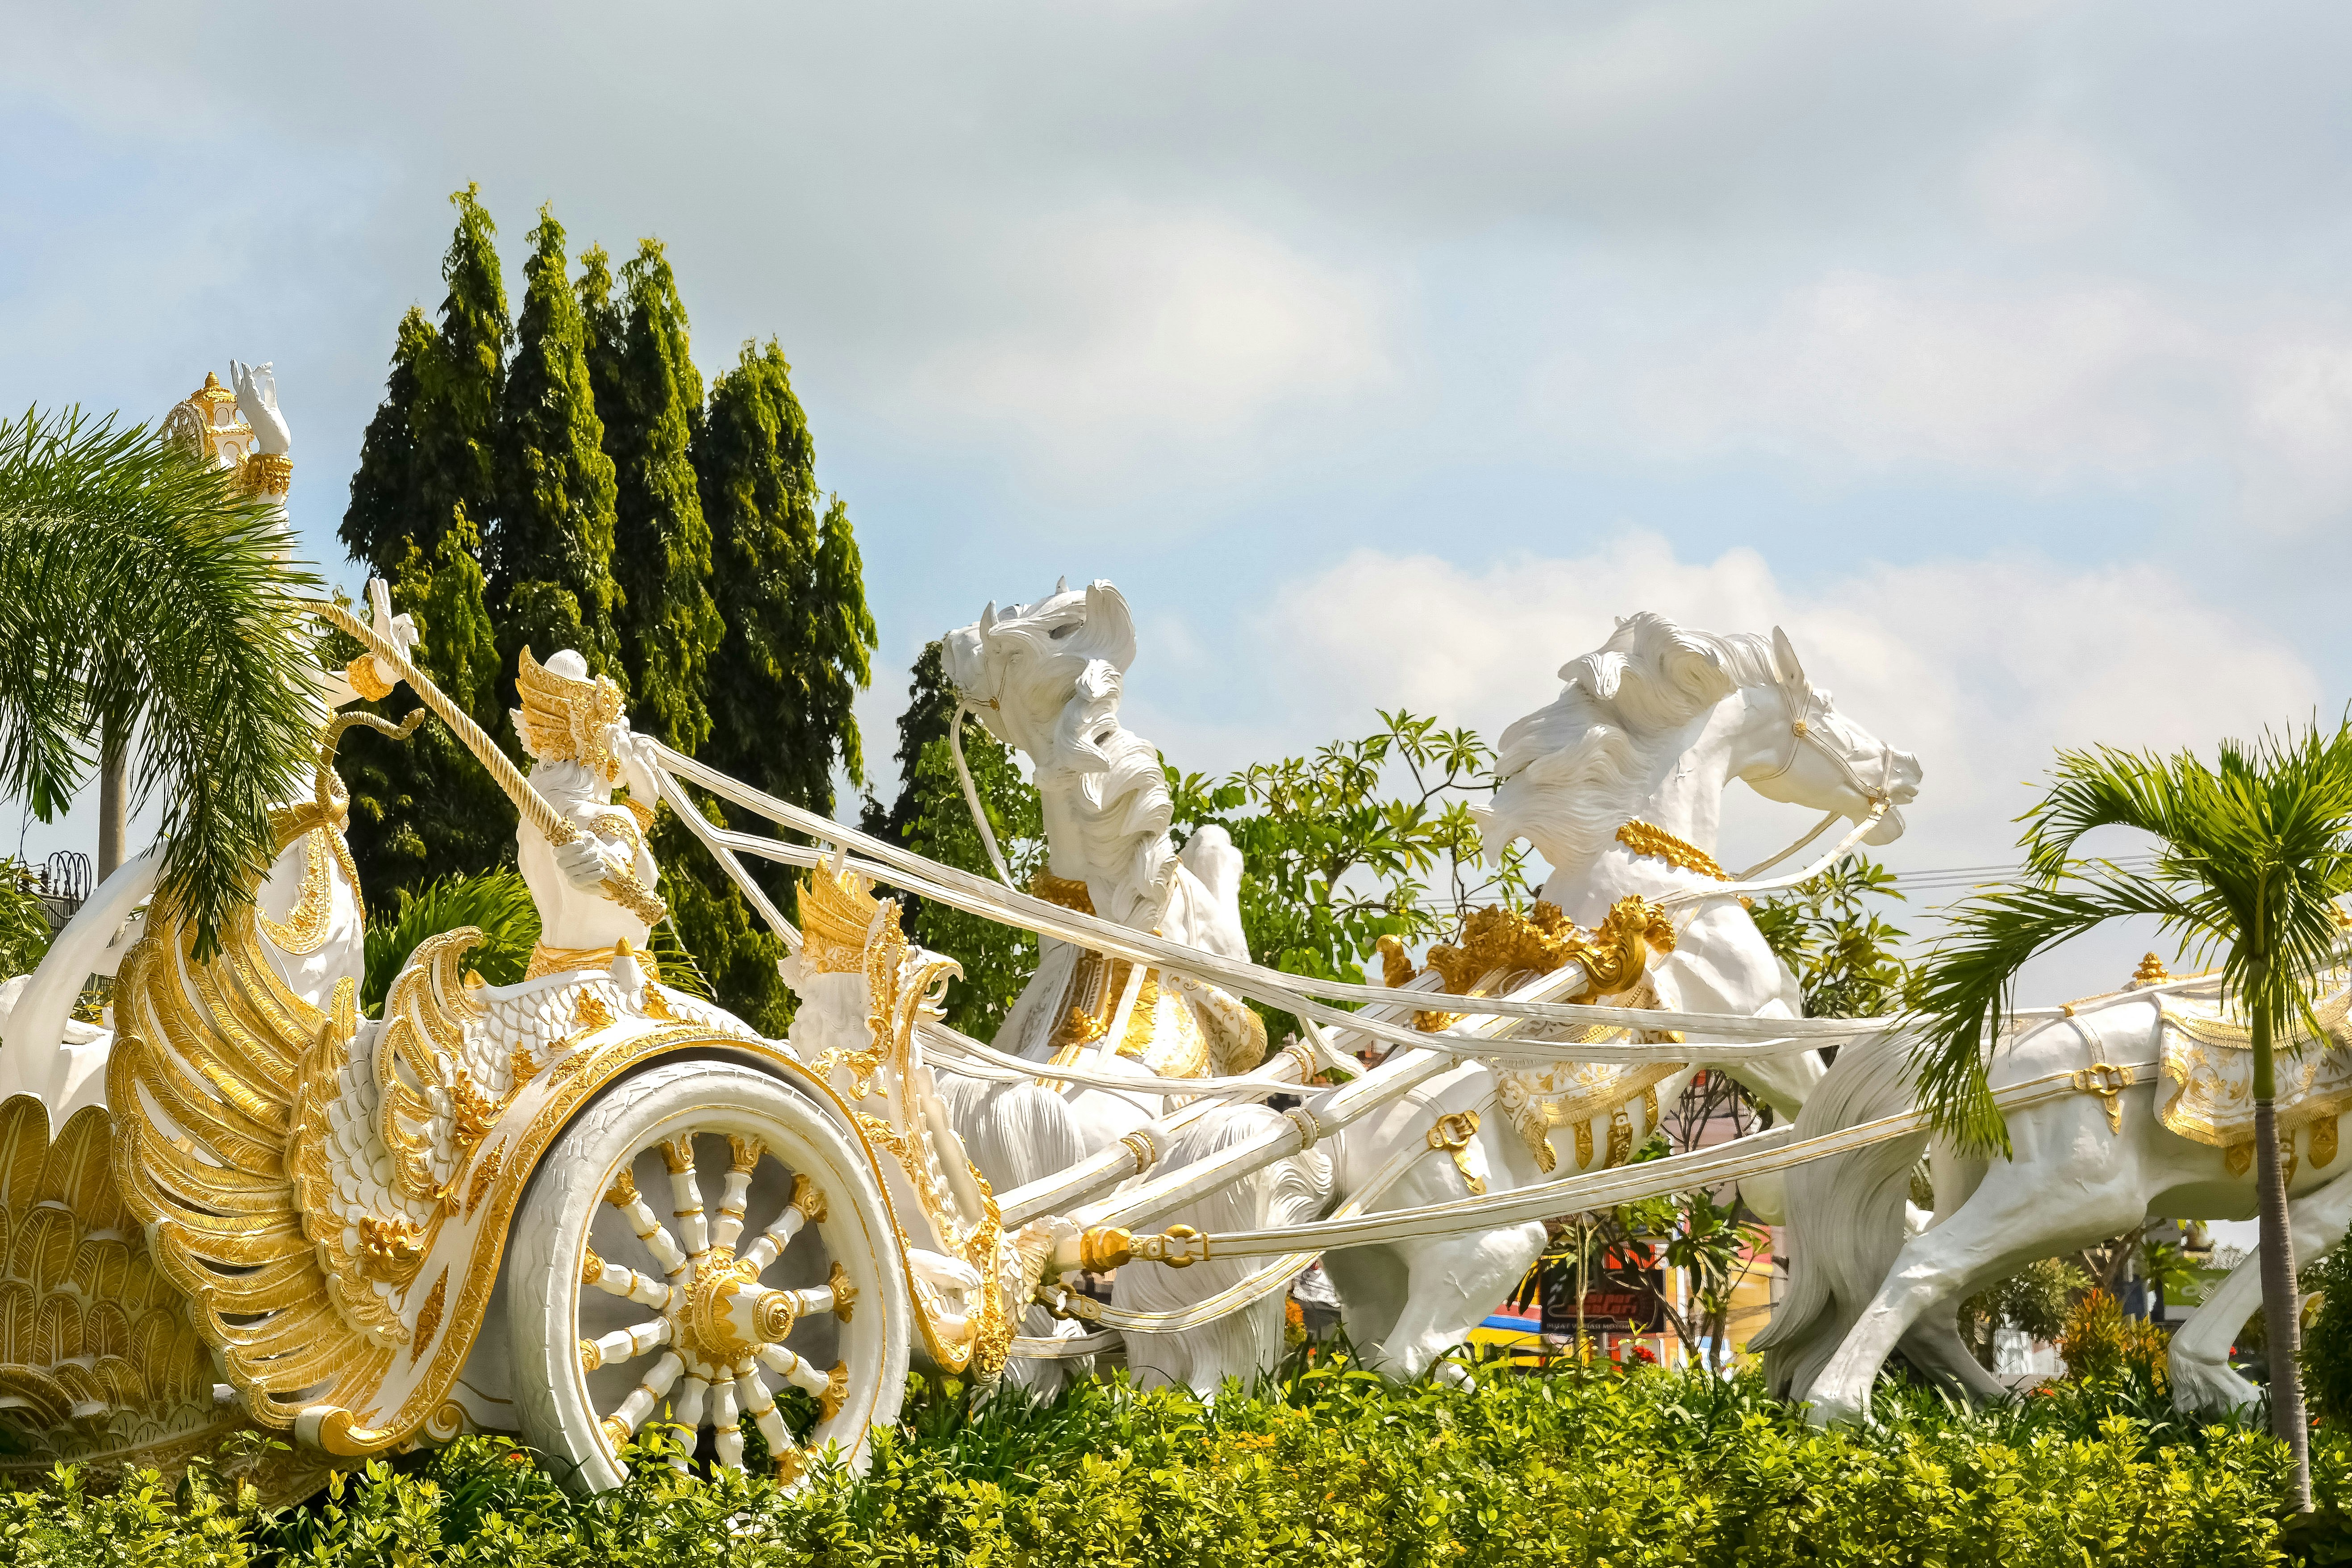 white and gold carriage on green grass field during daytime